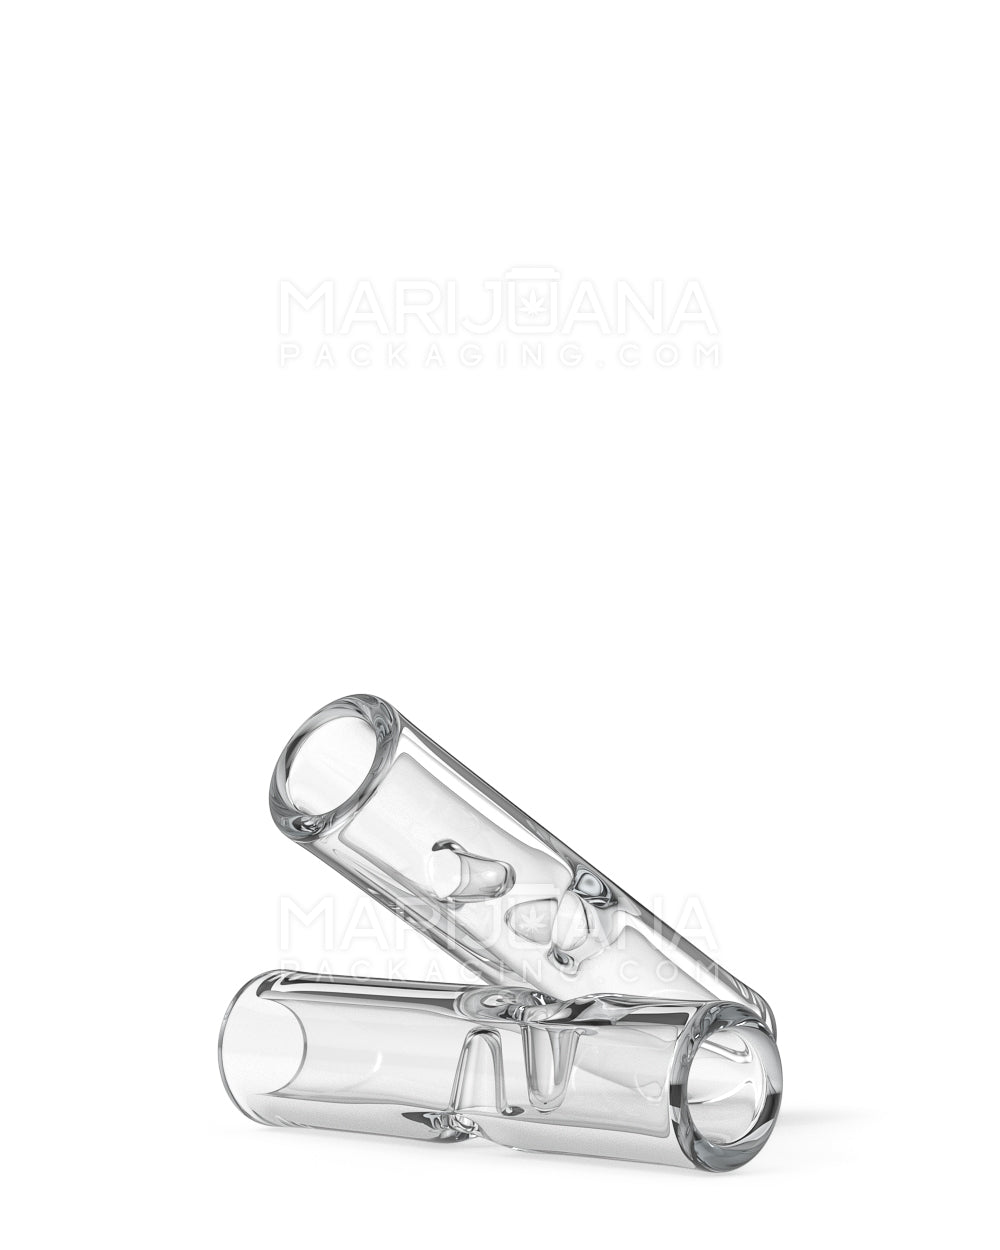 Glass Smoking Filter Tips Notched | 8mm - Clear - 175 Count